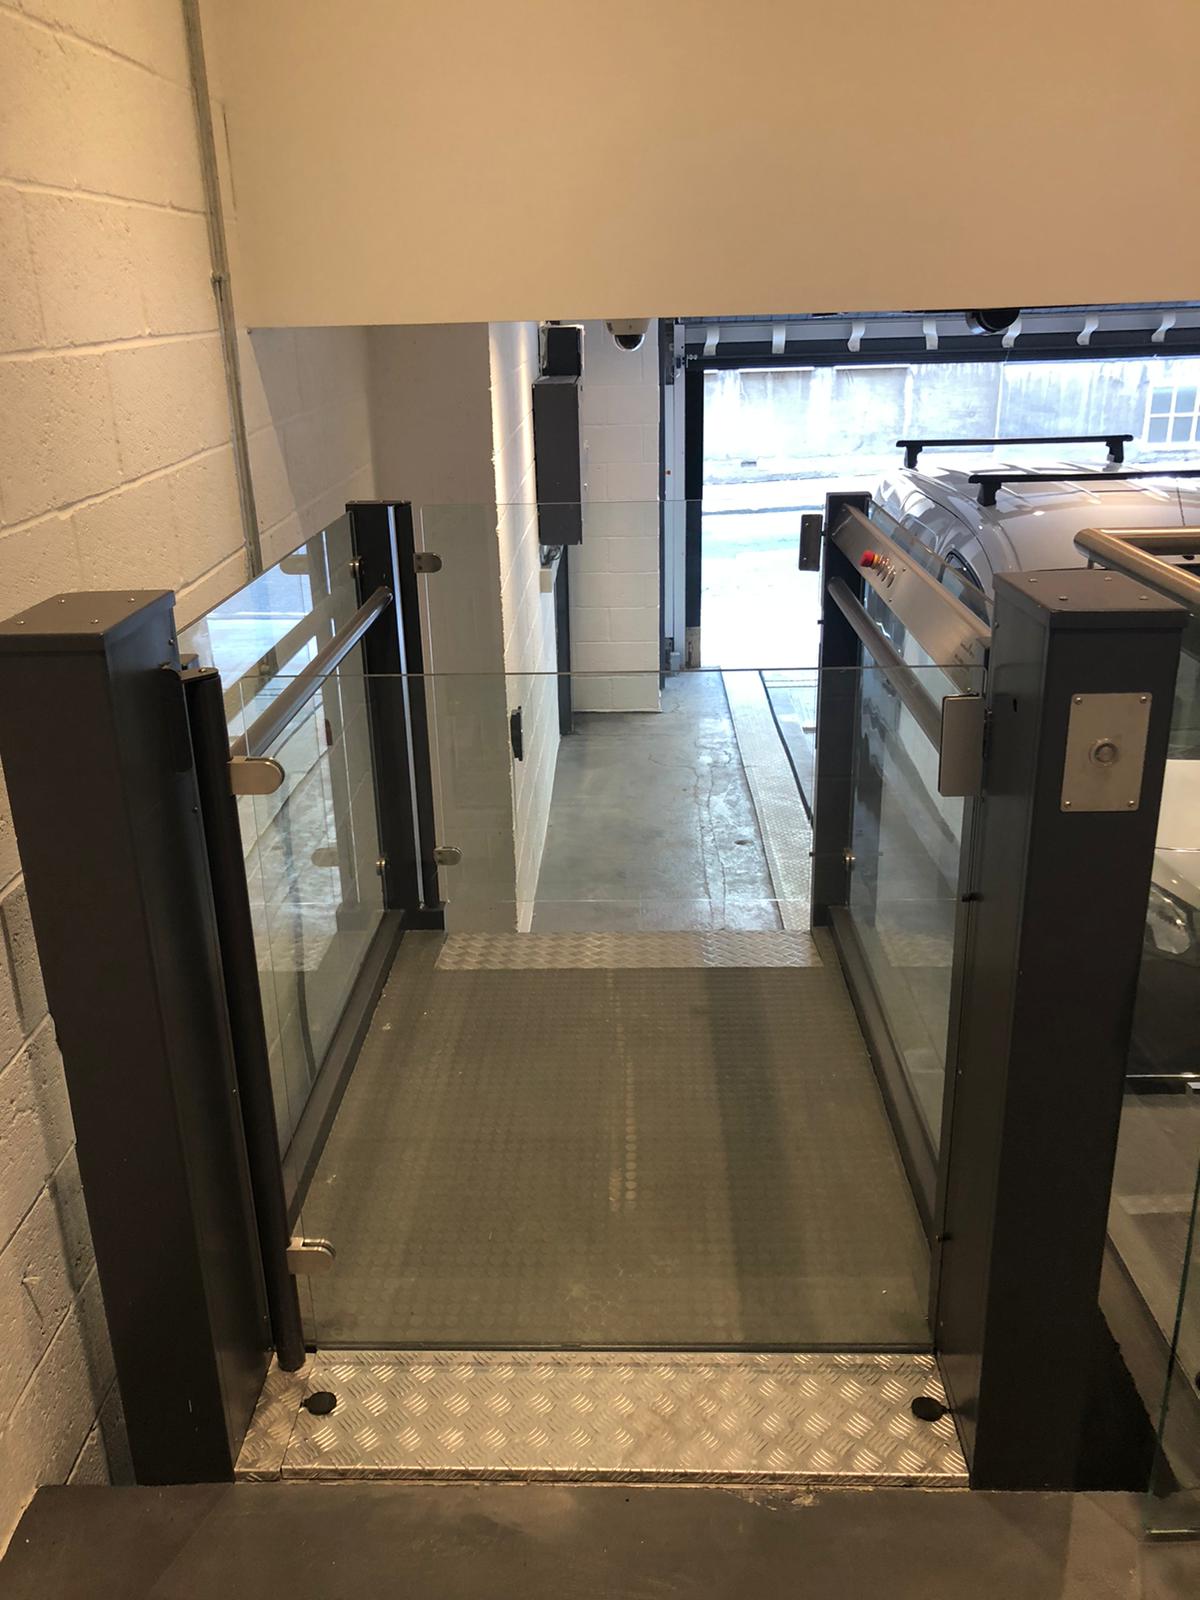 The lift offer street level access into the building